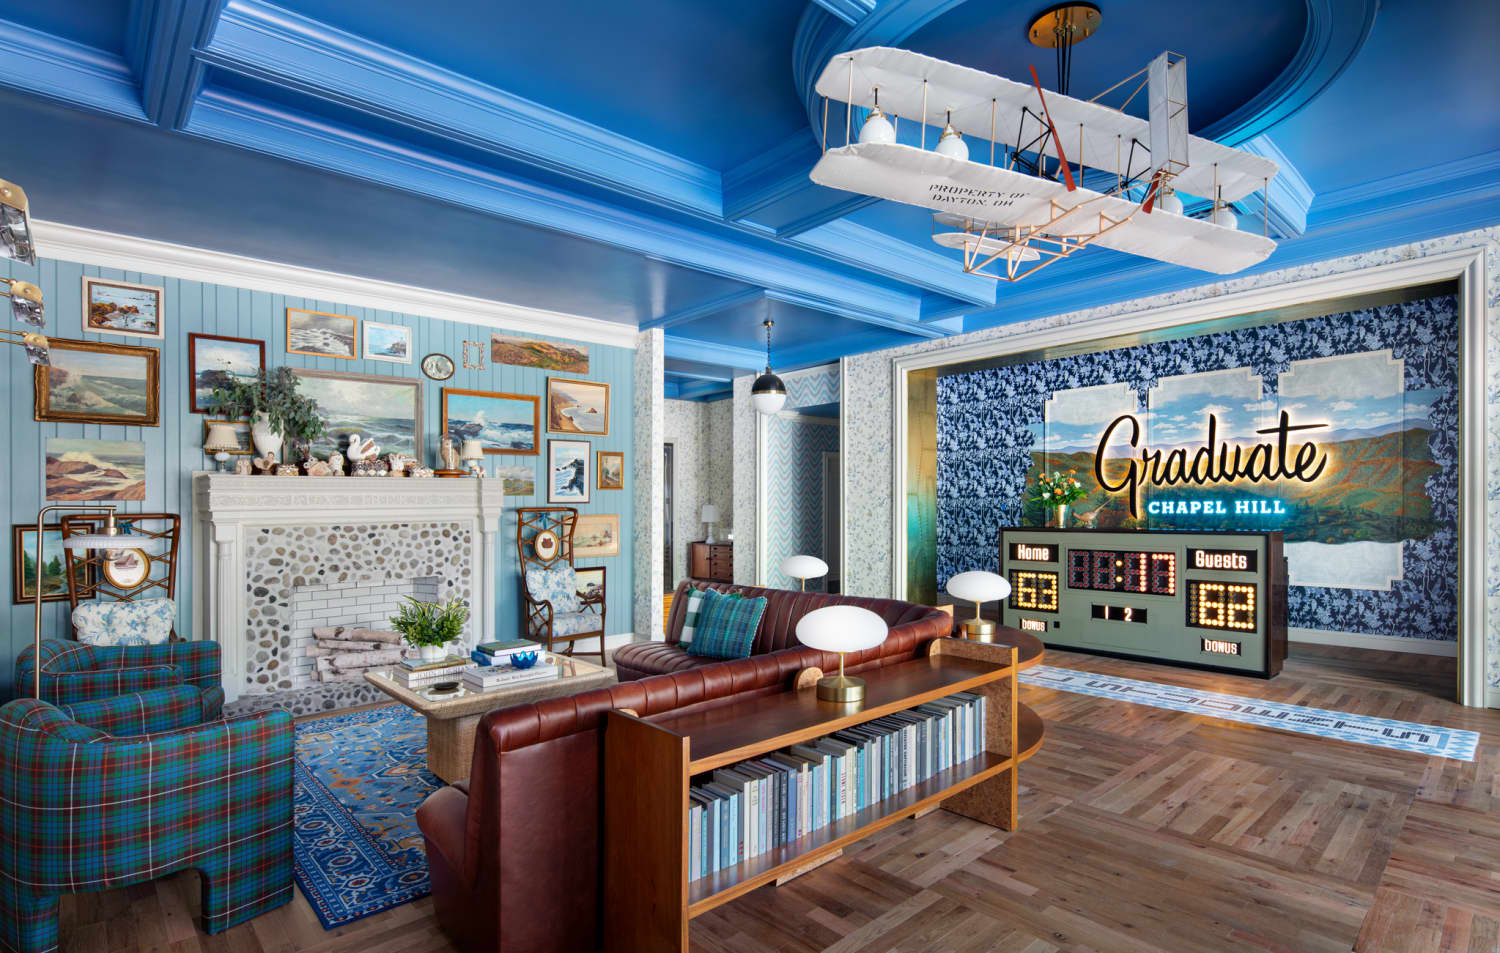 “Handcrafted Hotels” Showcases the Spirit of Graduate Hotels Across the Country